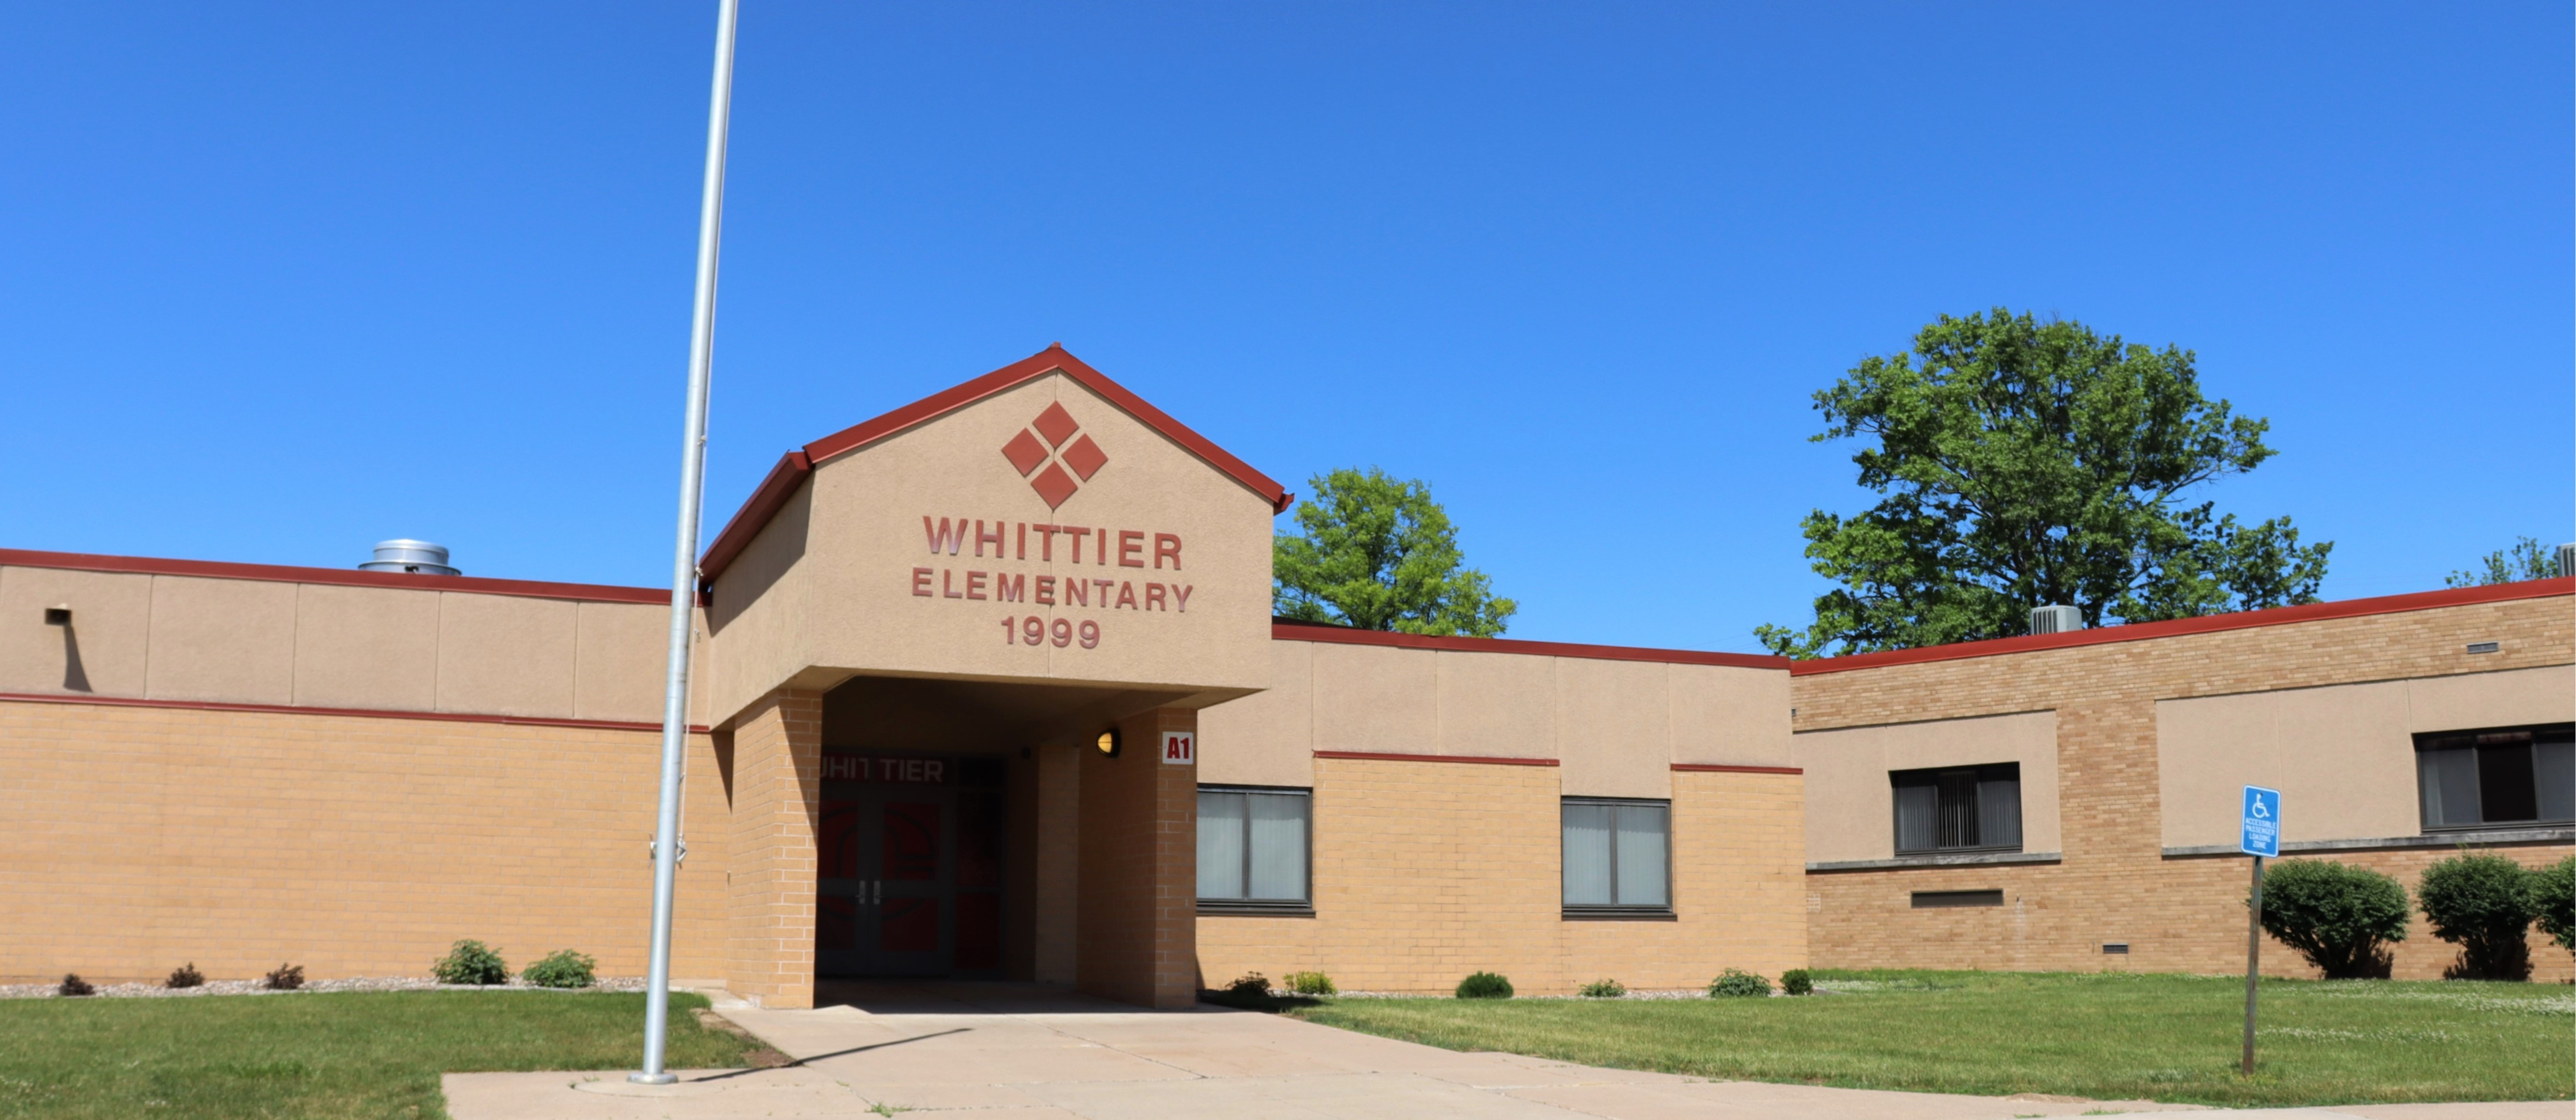 exterior view of whittier front office building